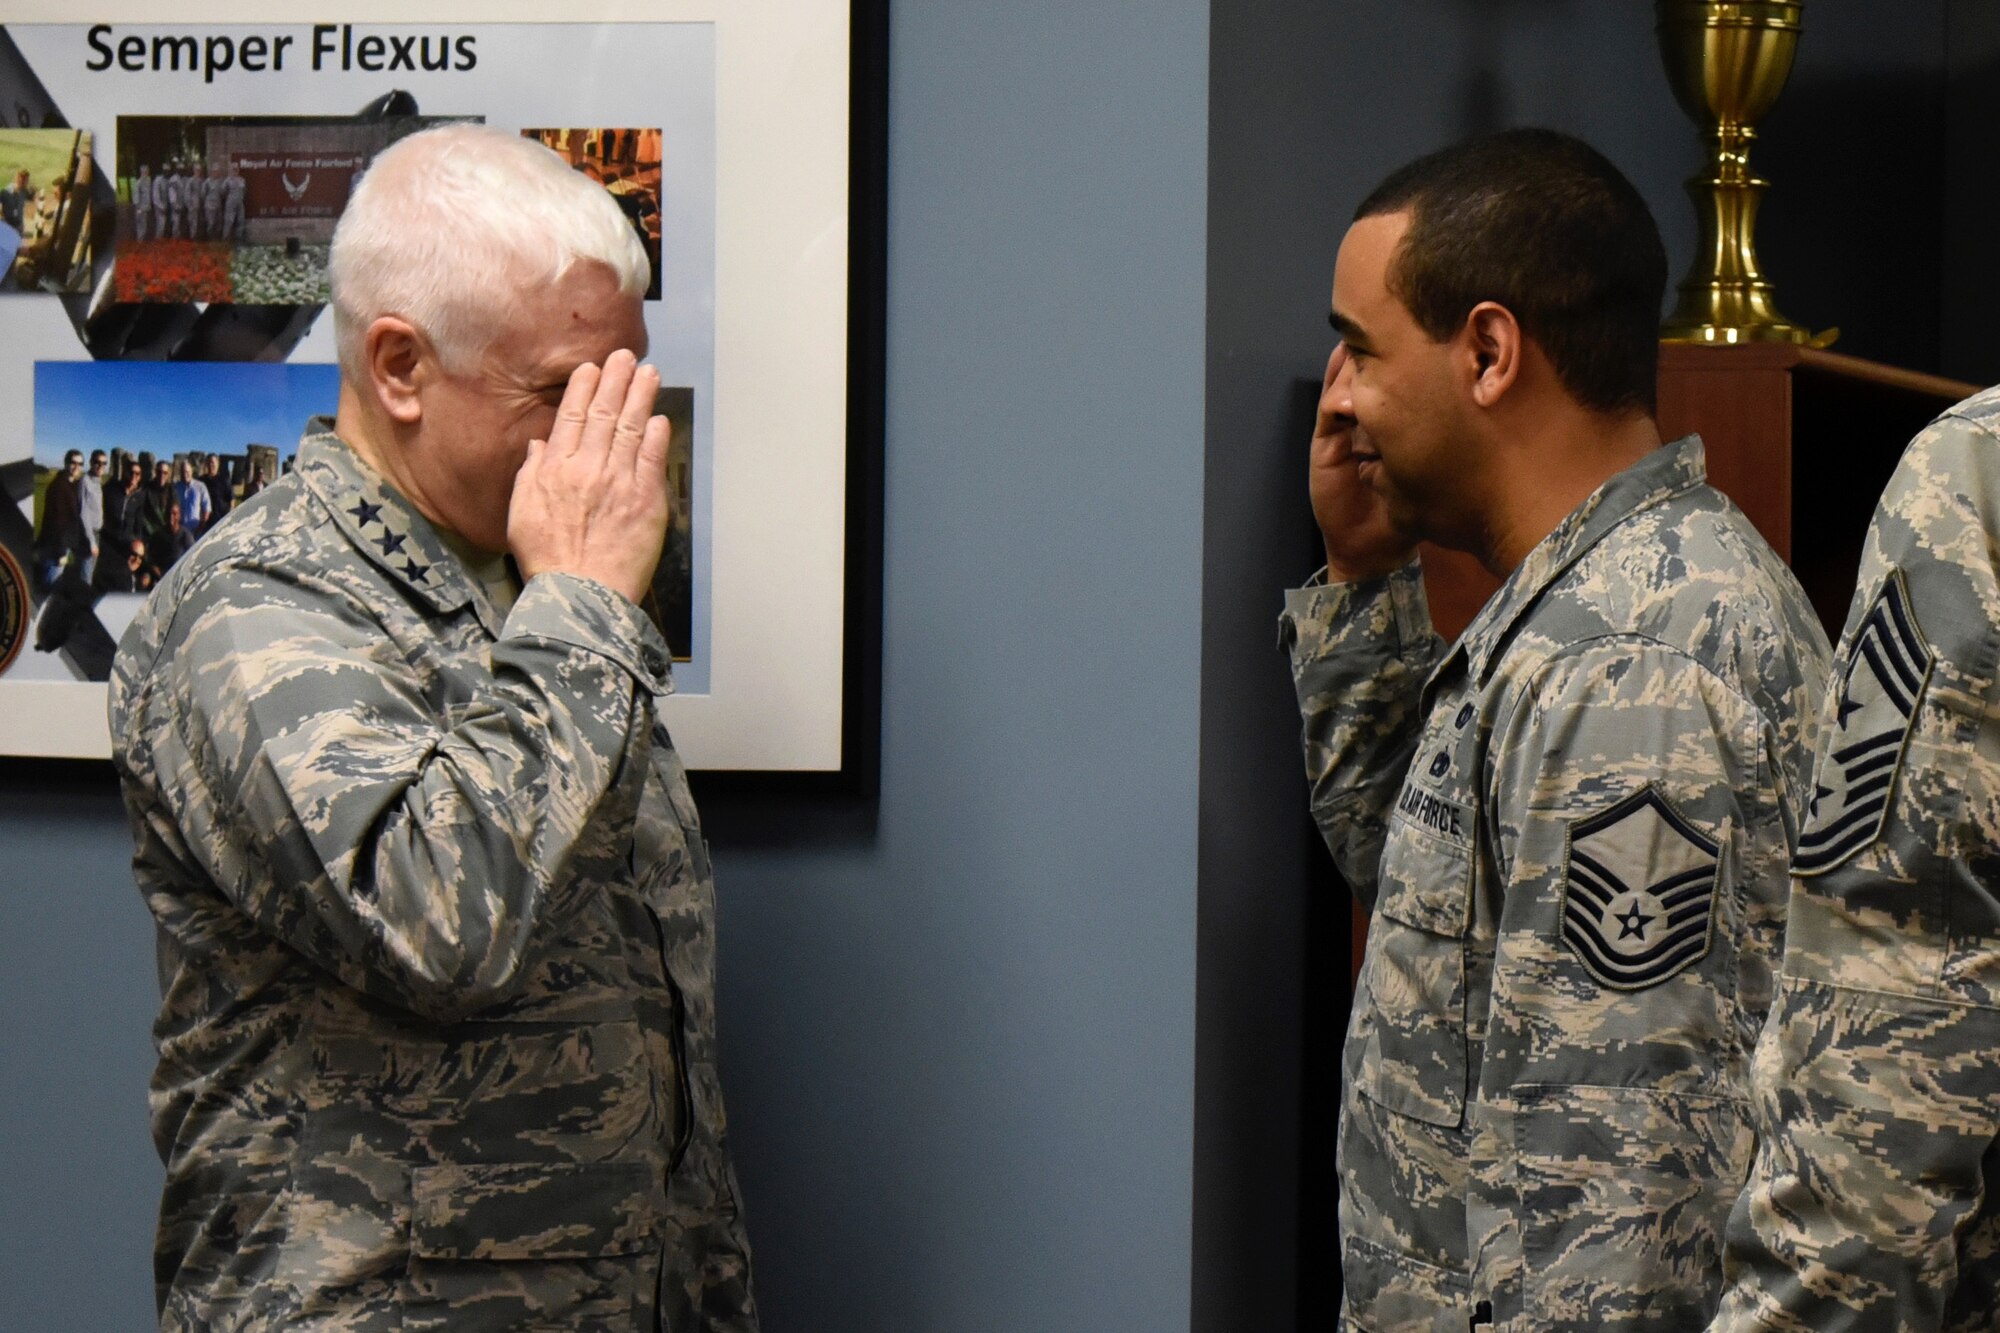 Lt. Gen. L. Scott Rice, the Director of the Air National Guard, Master Sgt. Dallas Perry, 235th Civil Engineering Flight program analyst, salutes Lt. Gen. L. Scott Rice, the Director of the Air National Guard, after being coined February 10, 2018 at Warfield Air National Guard Base, Middle River, Md.